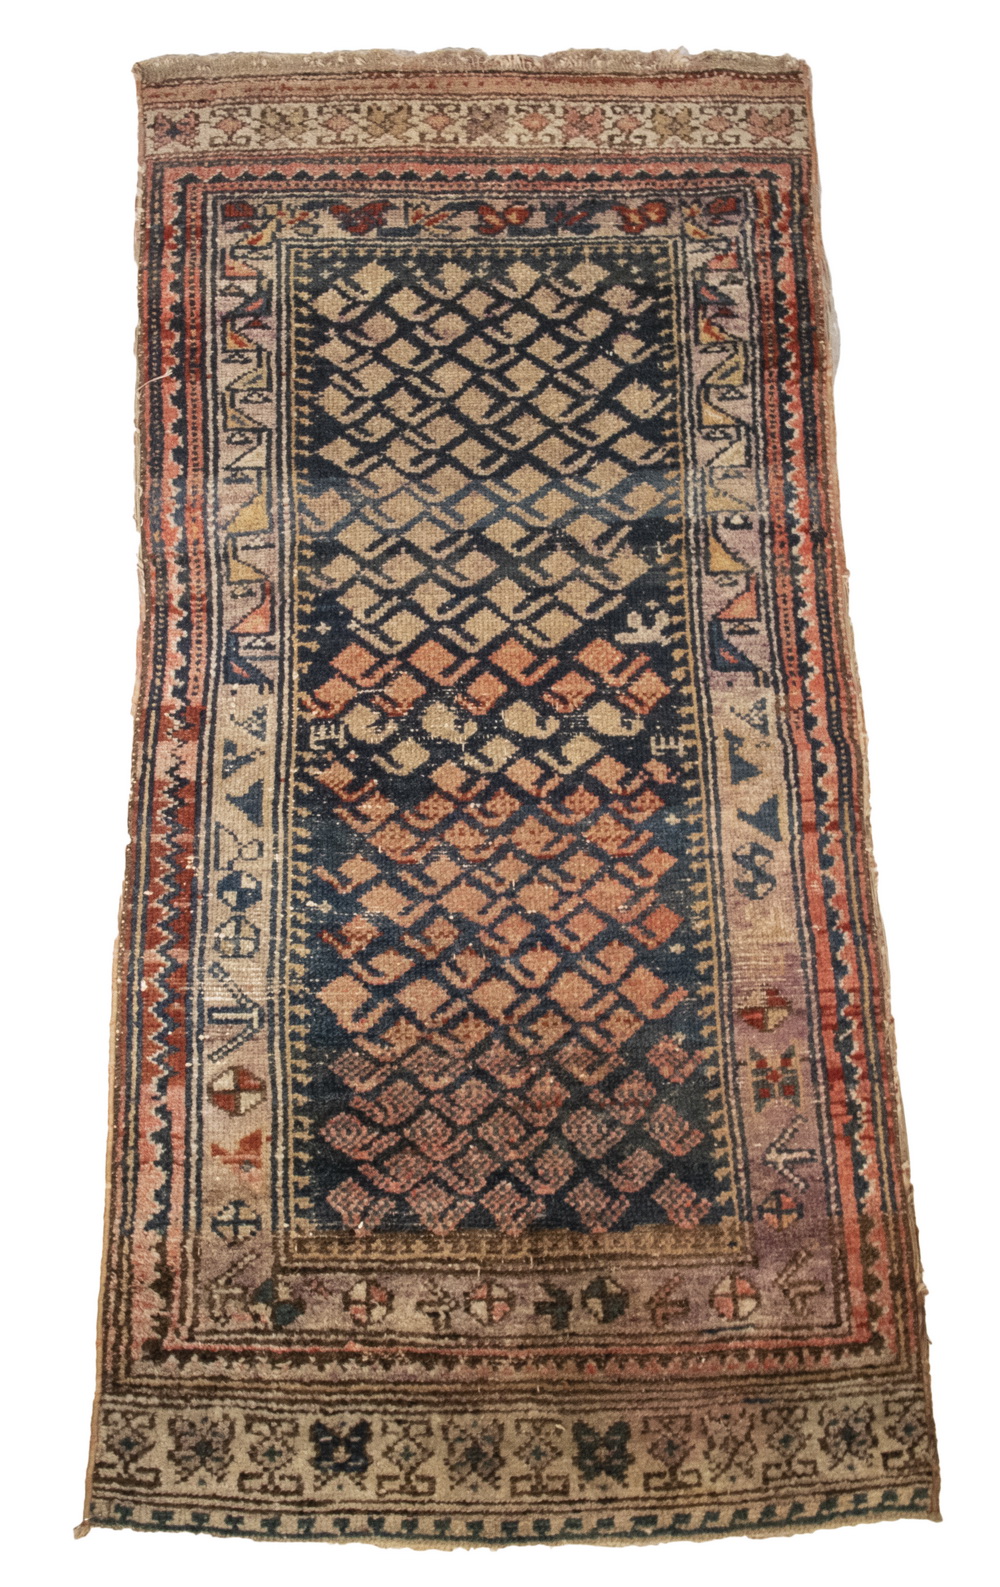 KURD RUG Staggered rows of boteh 302076